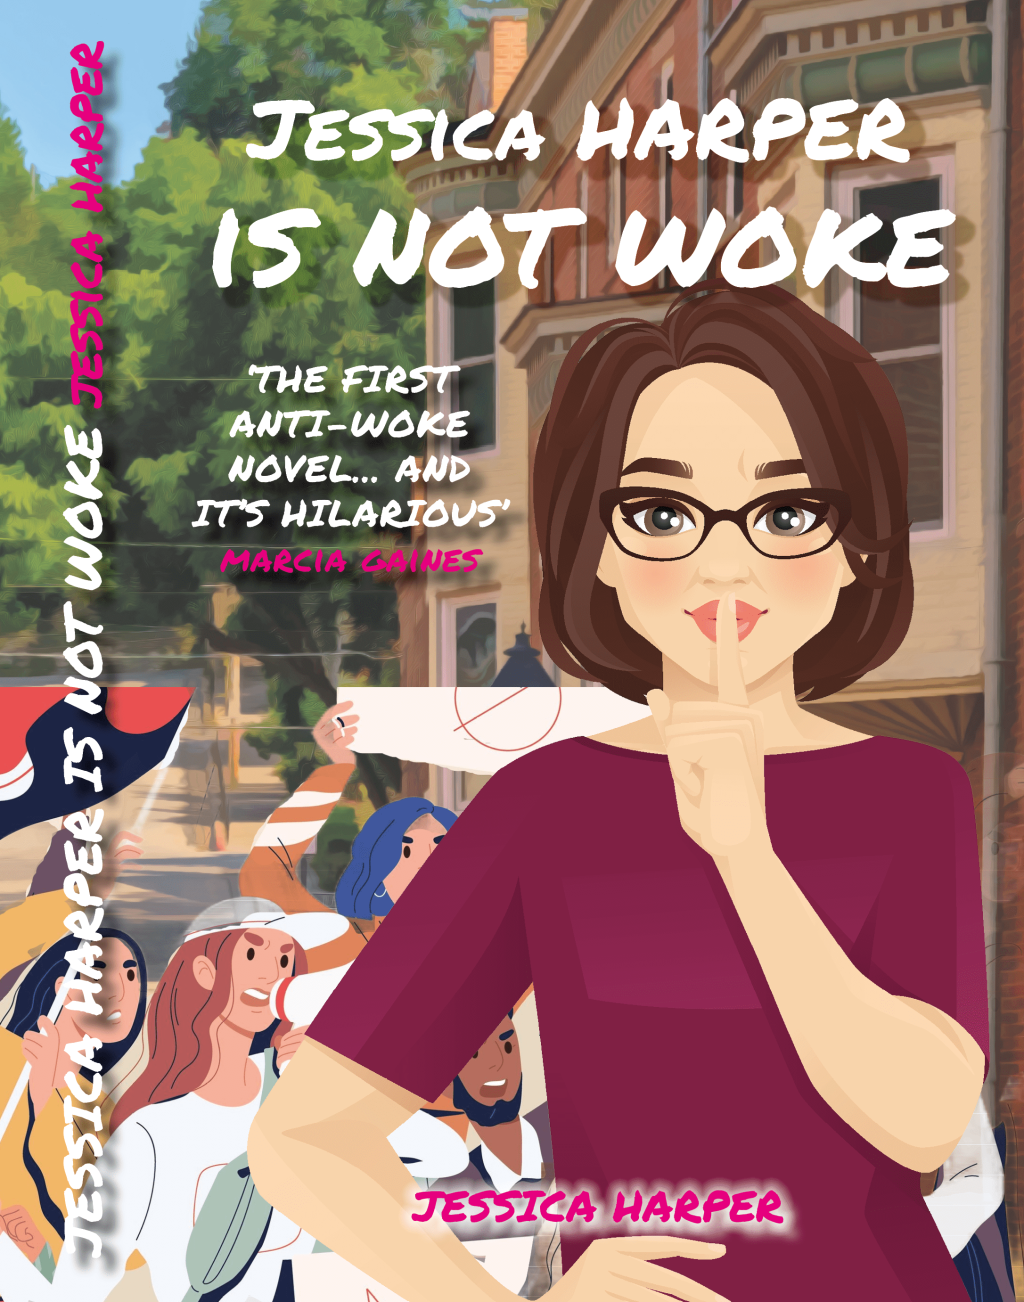 Jessica Harper Is Not Woke available on Kindle and in paperback